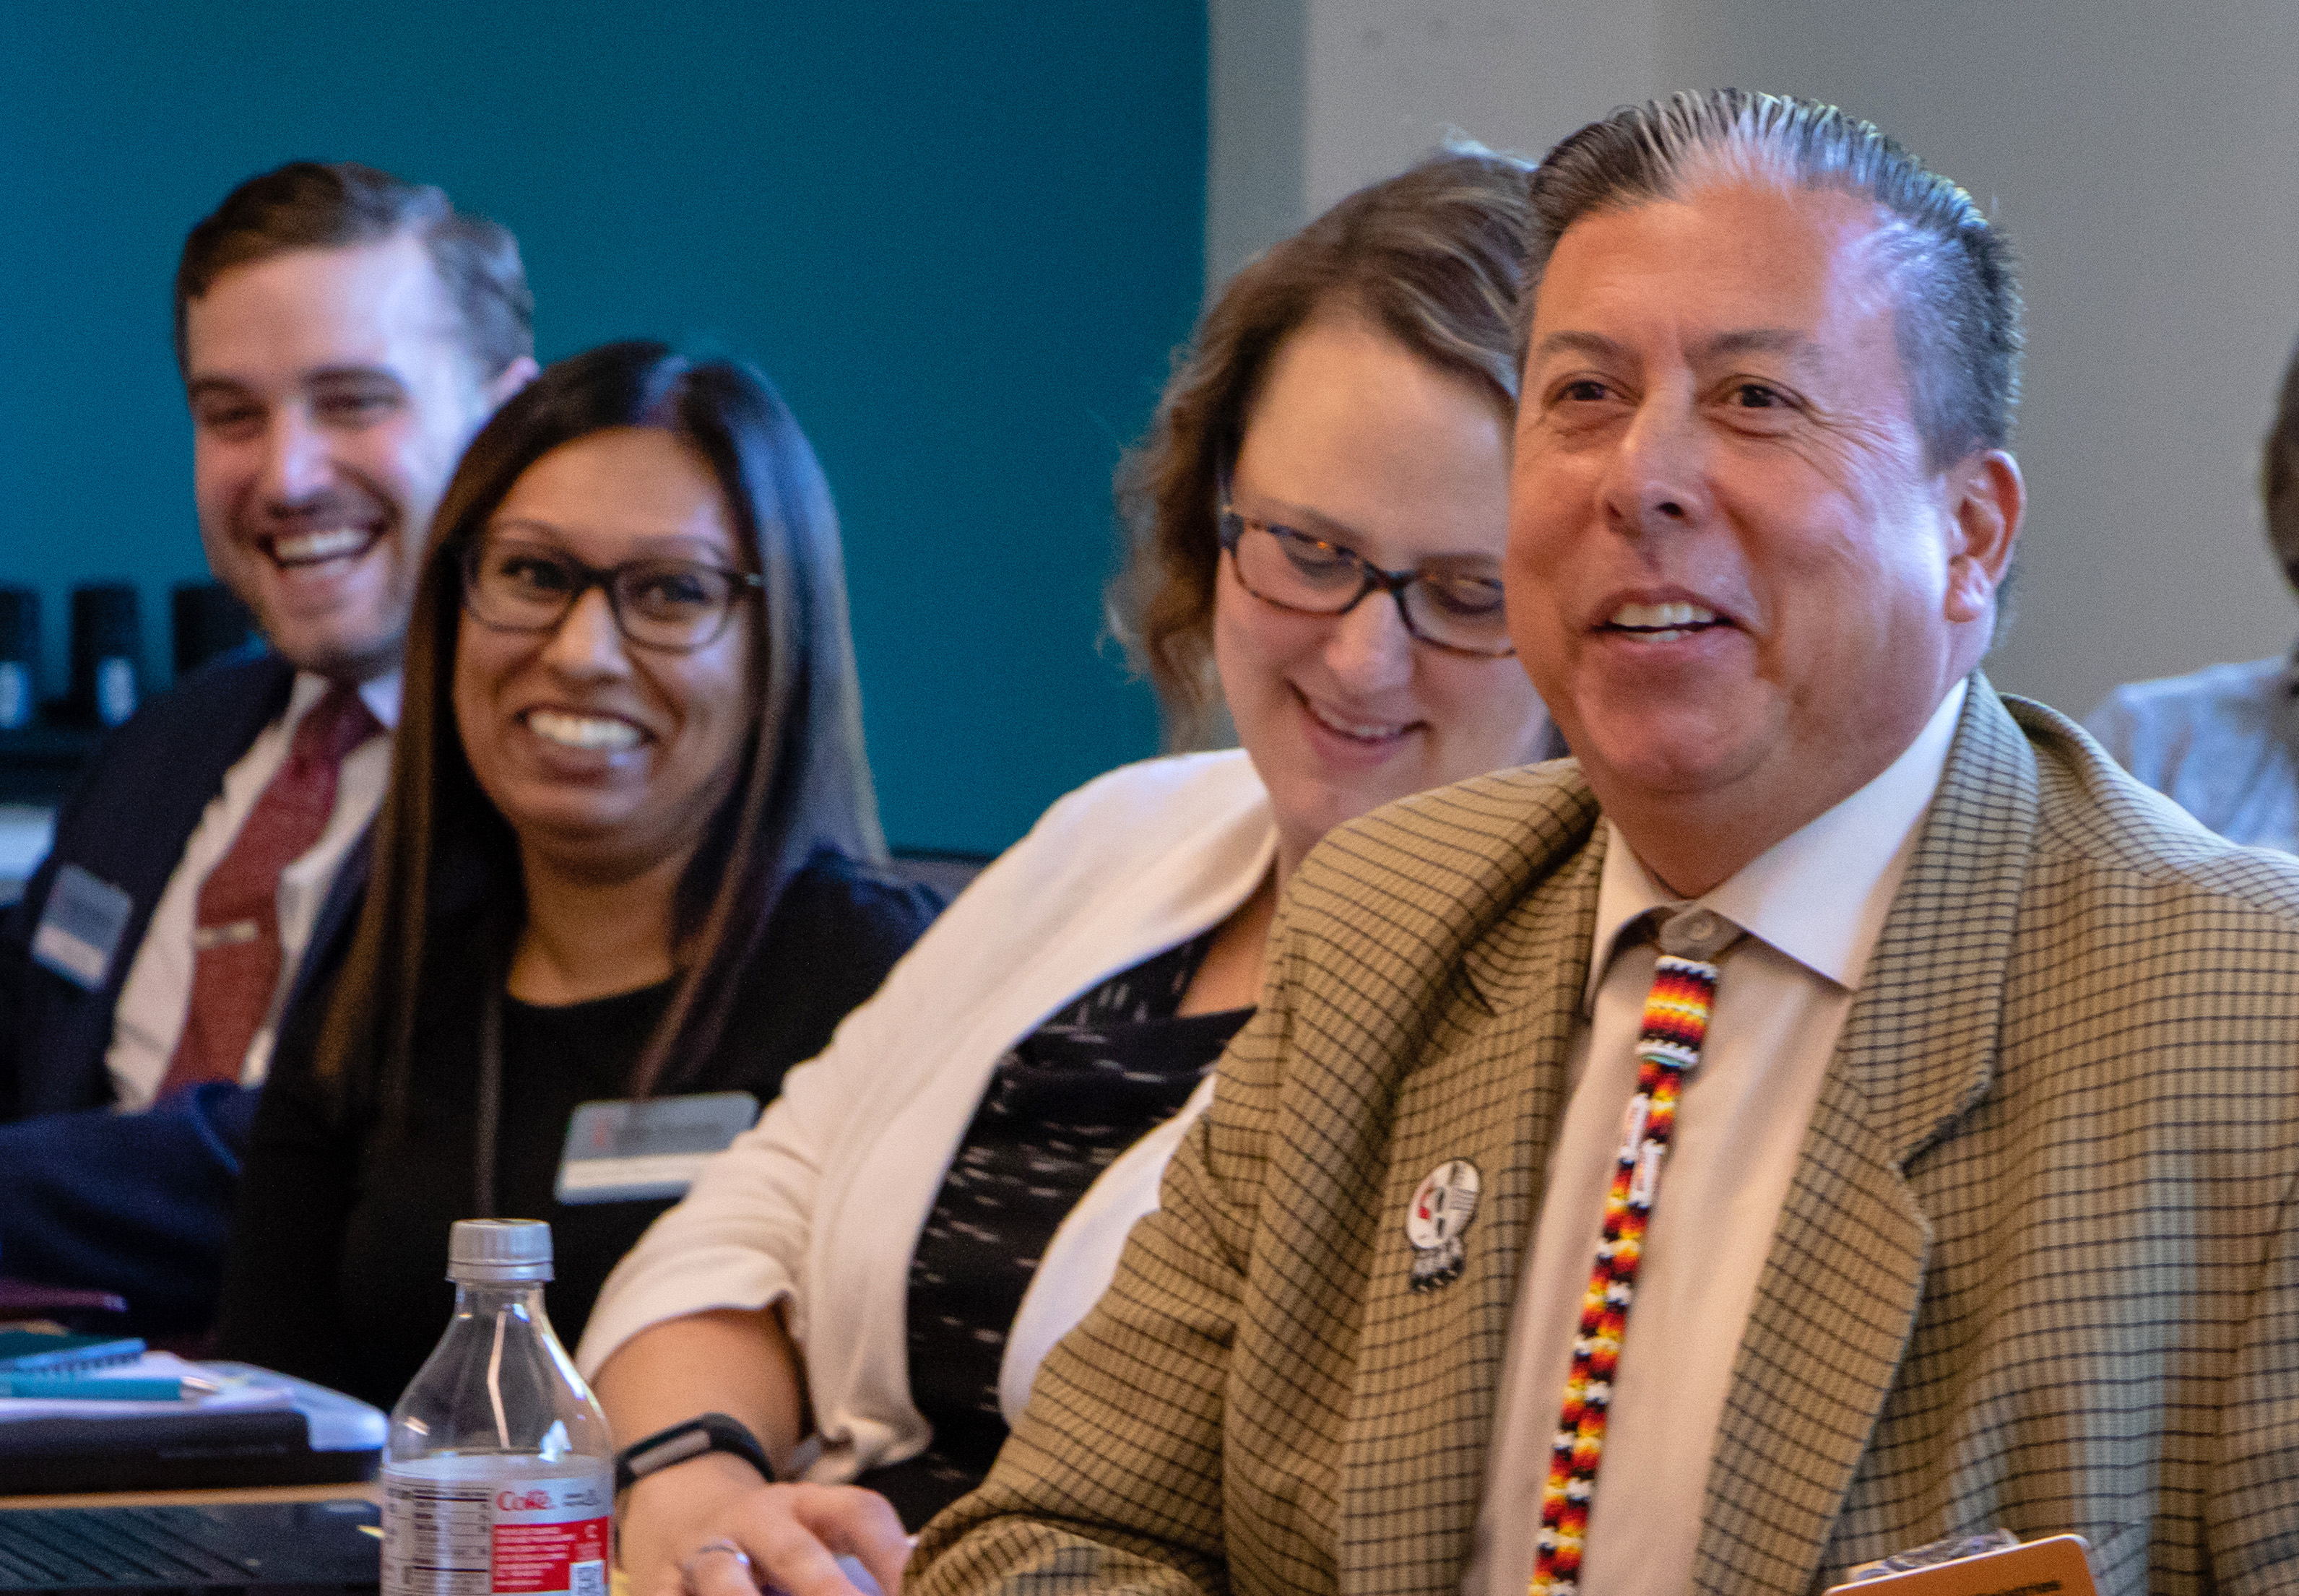 During the United Methodist Board of Global Ministries’ fall meeting, the Rev. David Wilson makes a presentation at a committee meeting on Native American ministries supported by The Advance, a voluntary giving program of The United Methodist Church. Photo by Jen Silver, Global Ministries.